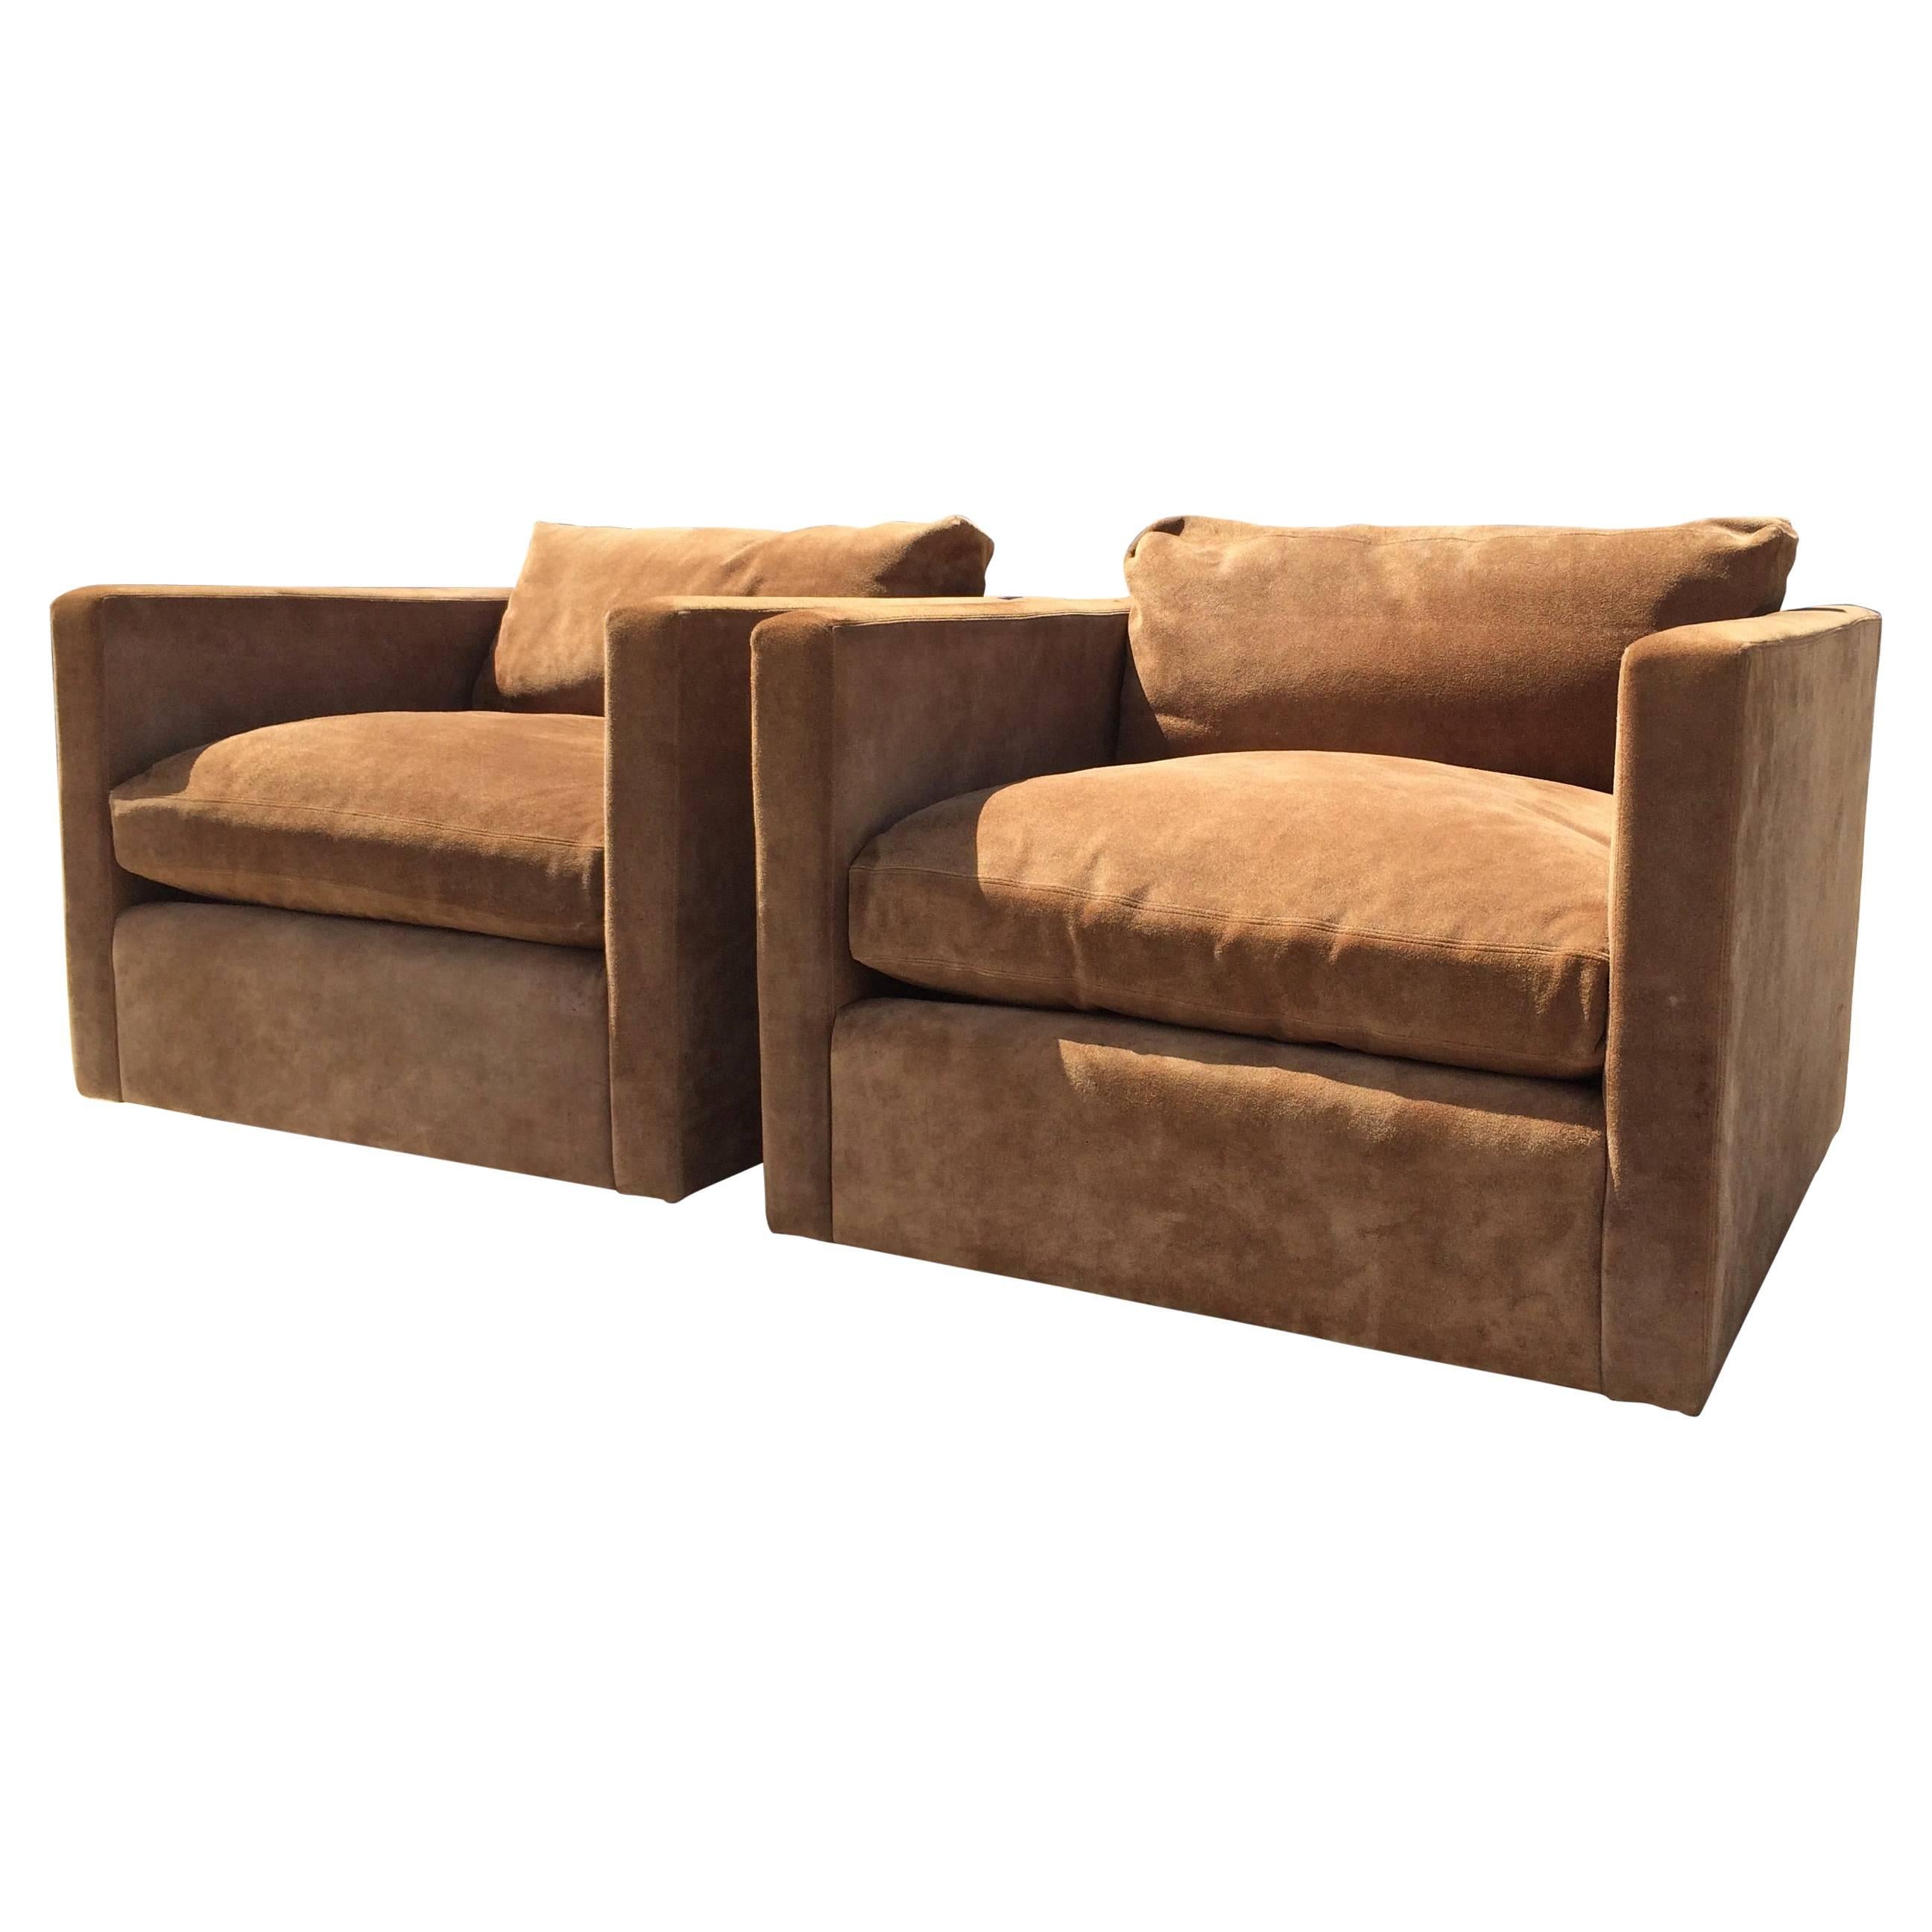 Pair of Charles Pfister Suede Leather Lounge Chairs for Knoll